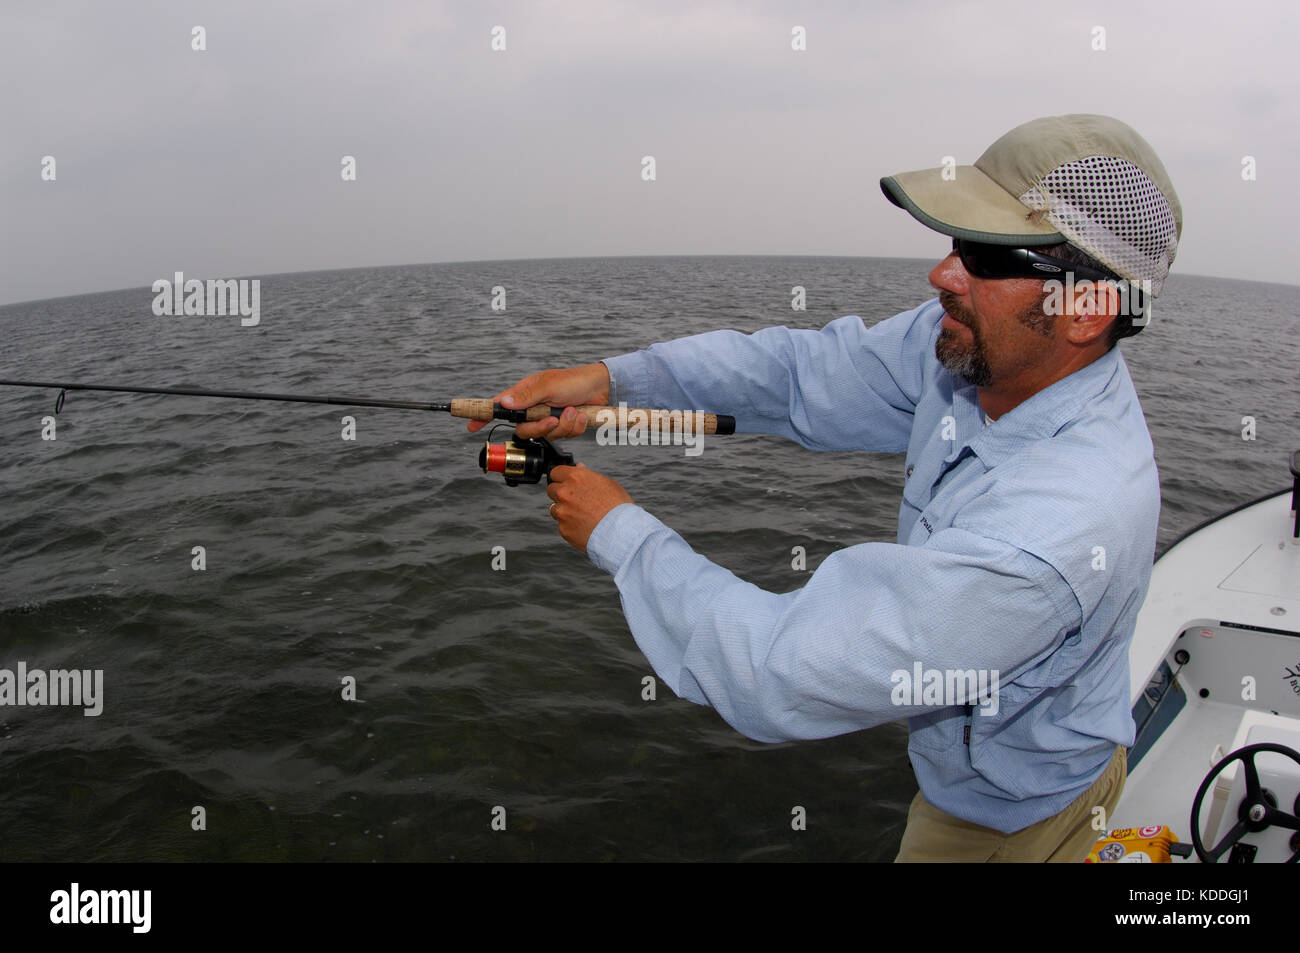 A fisherman casts a spinning rod for redfish while fishing on the shallow flats of the Laguna Madre in South Texas Stock Photo